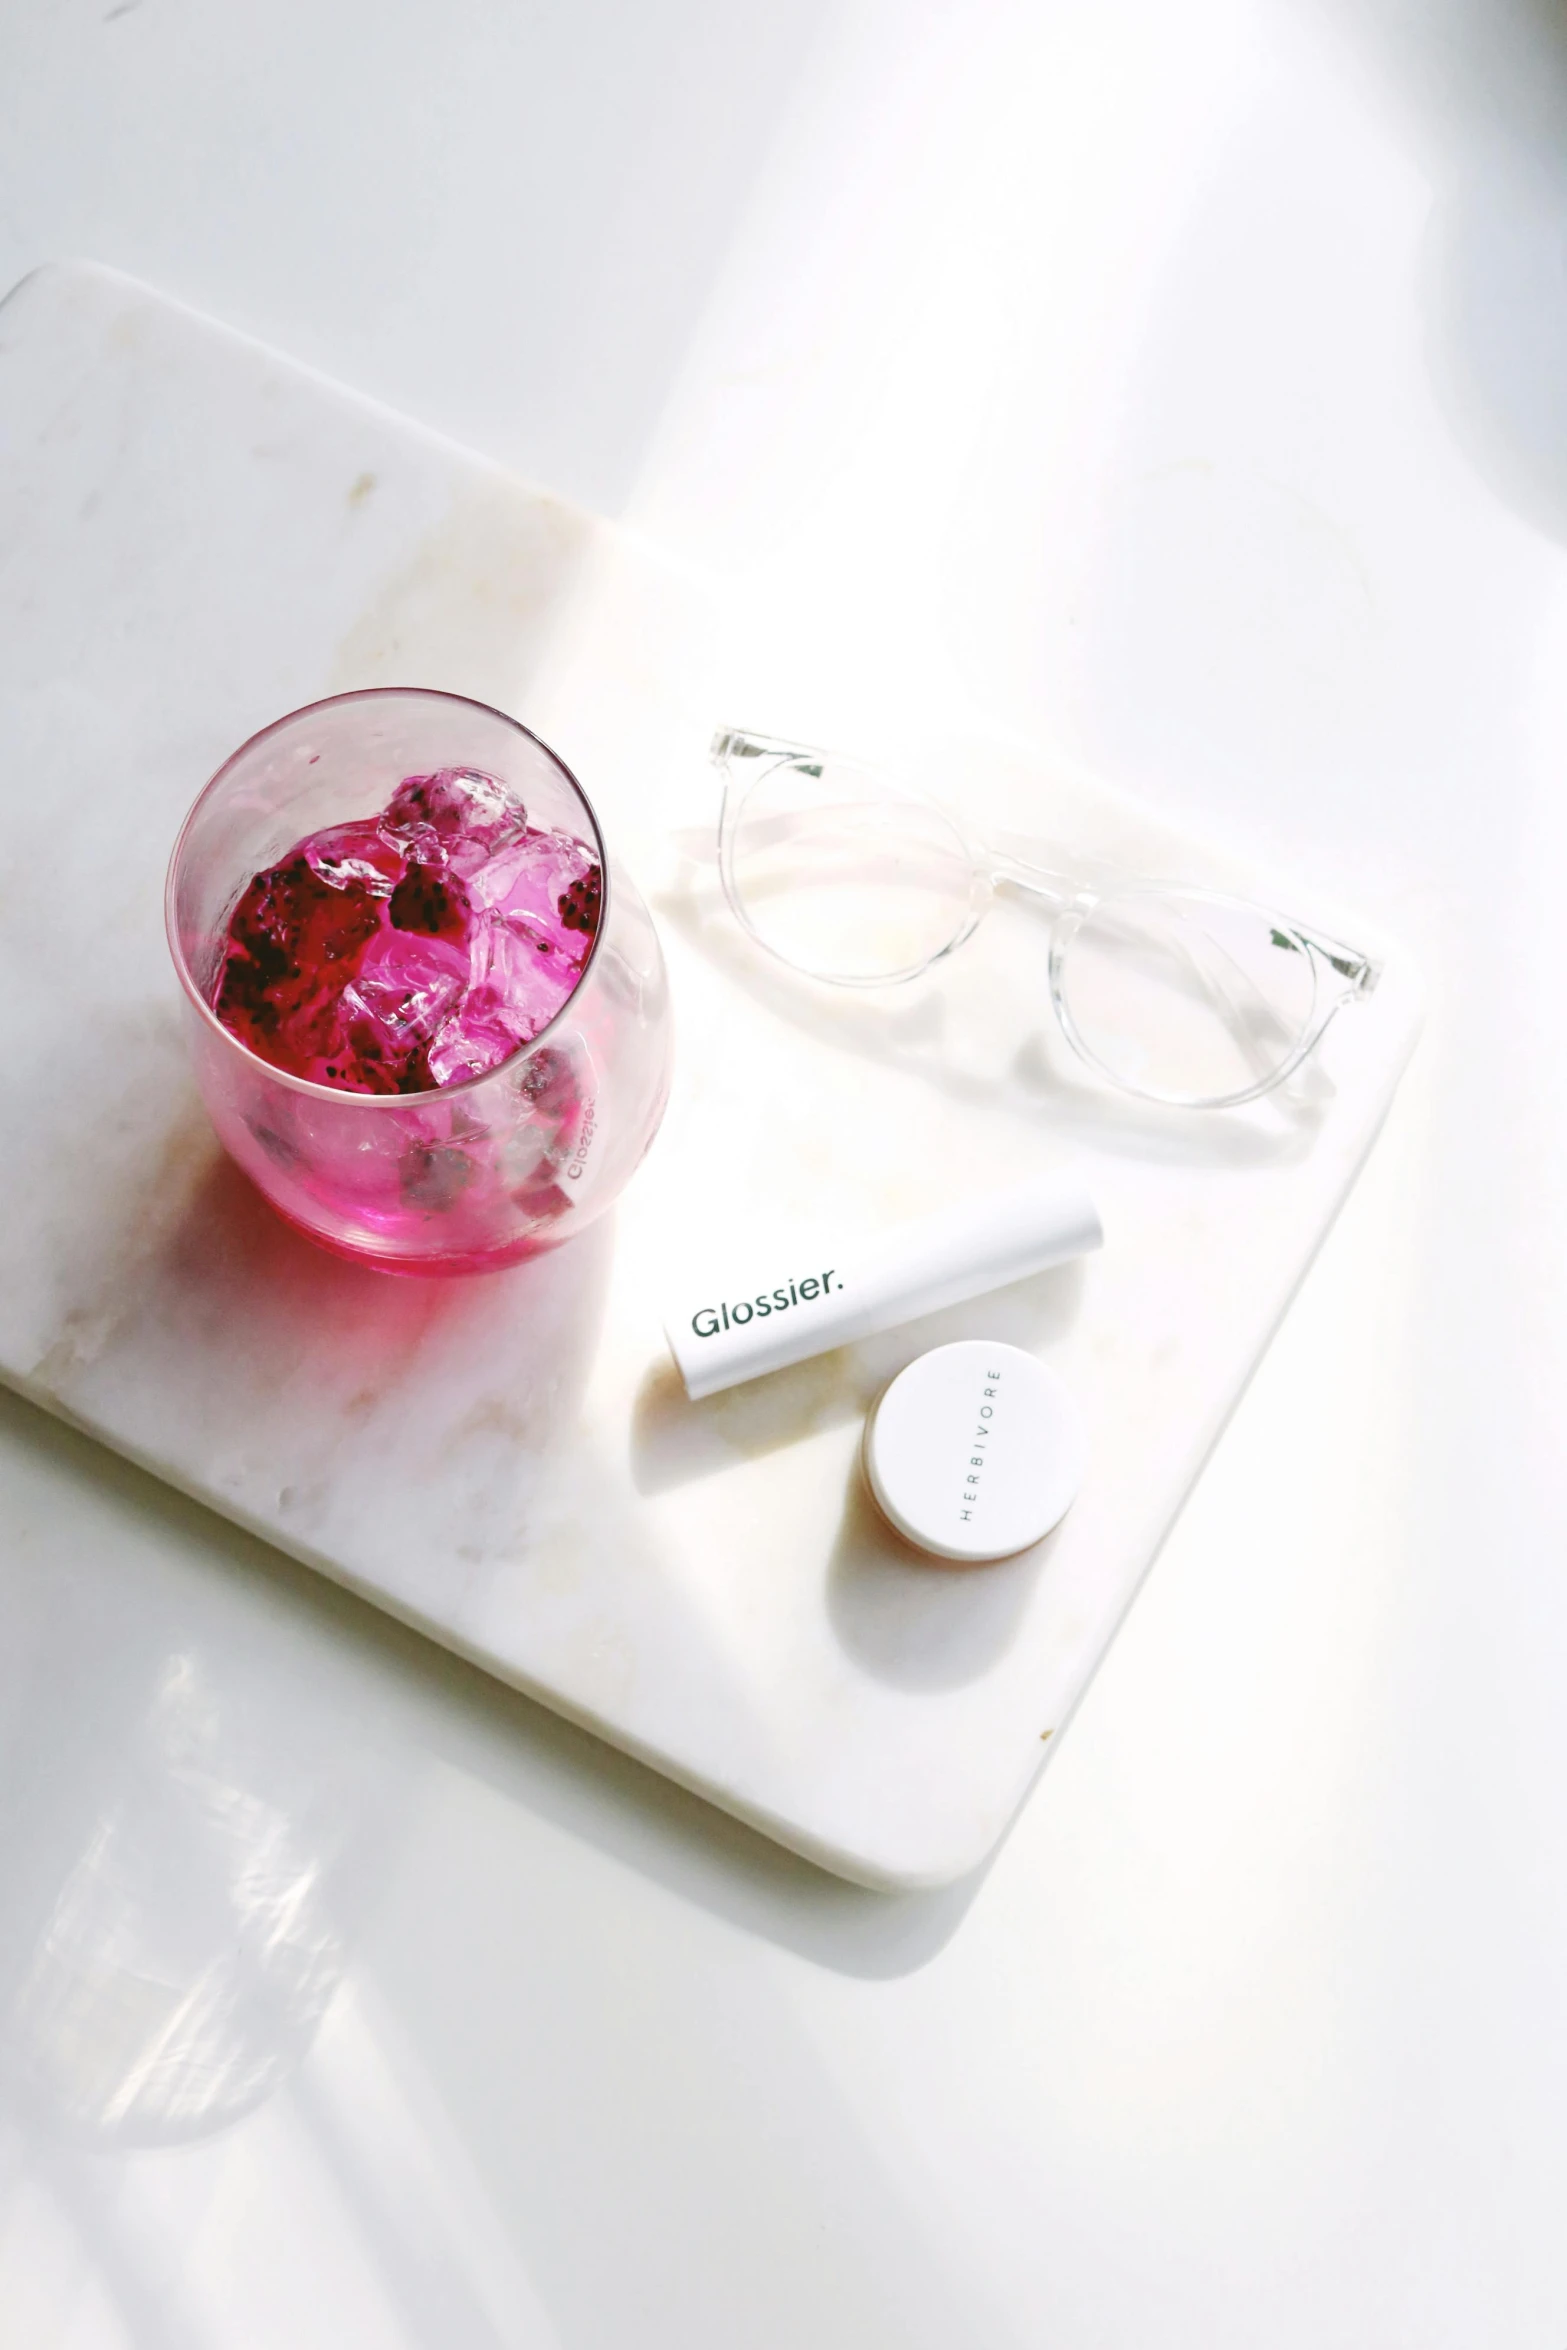 a glass of pink liquid sitting on top of a cutting board, inspired by An Gyeon, rounded eyeglasses, pills, sleek white, while marble